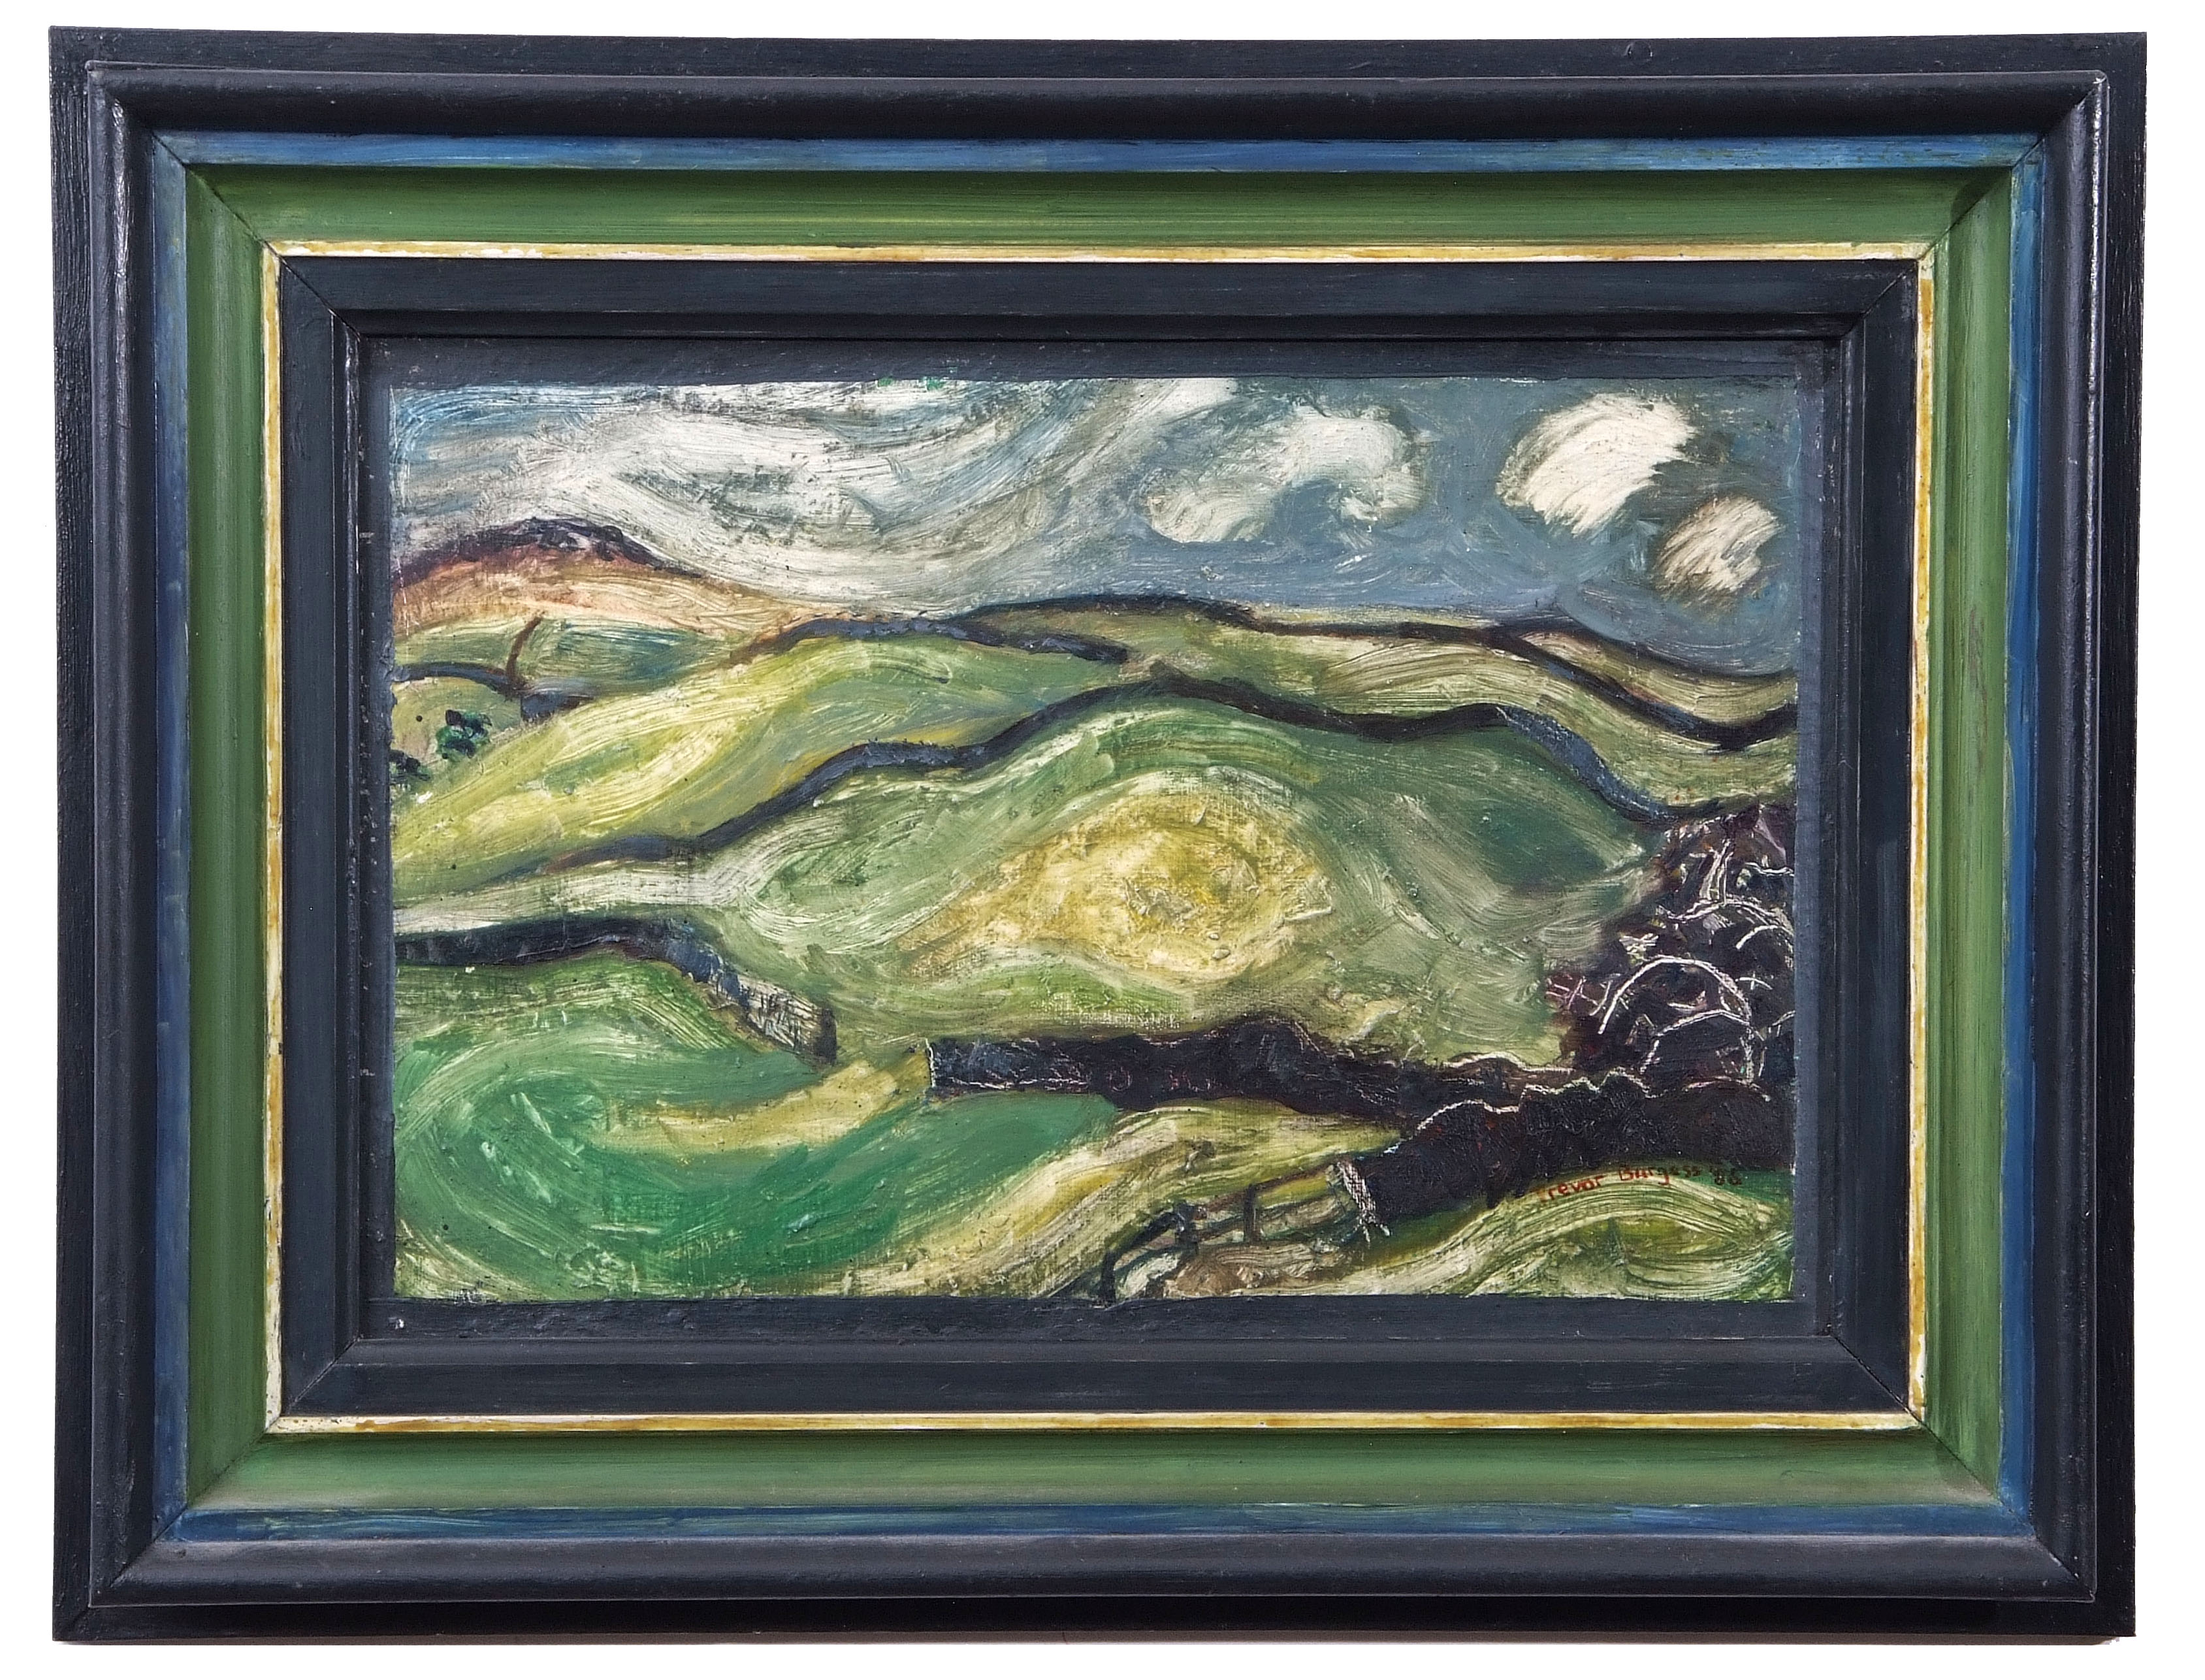 AR Trevor Burgess (contemporary) Landscape oil on board, signed and dated 86 lower right, 23 x 34cm